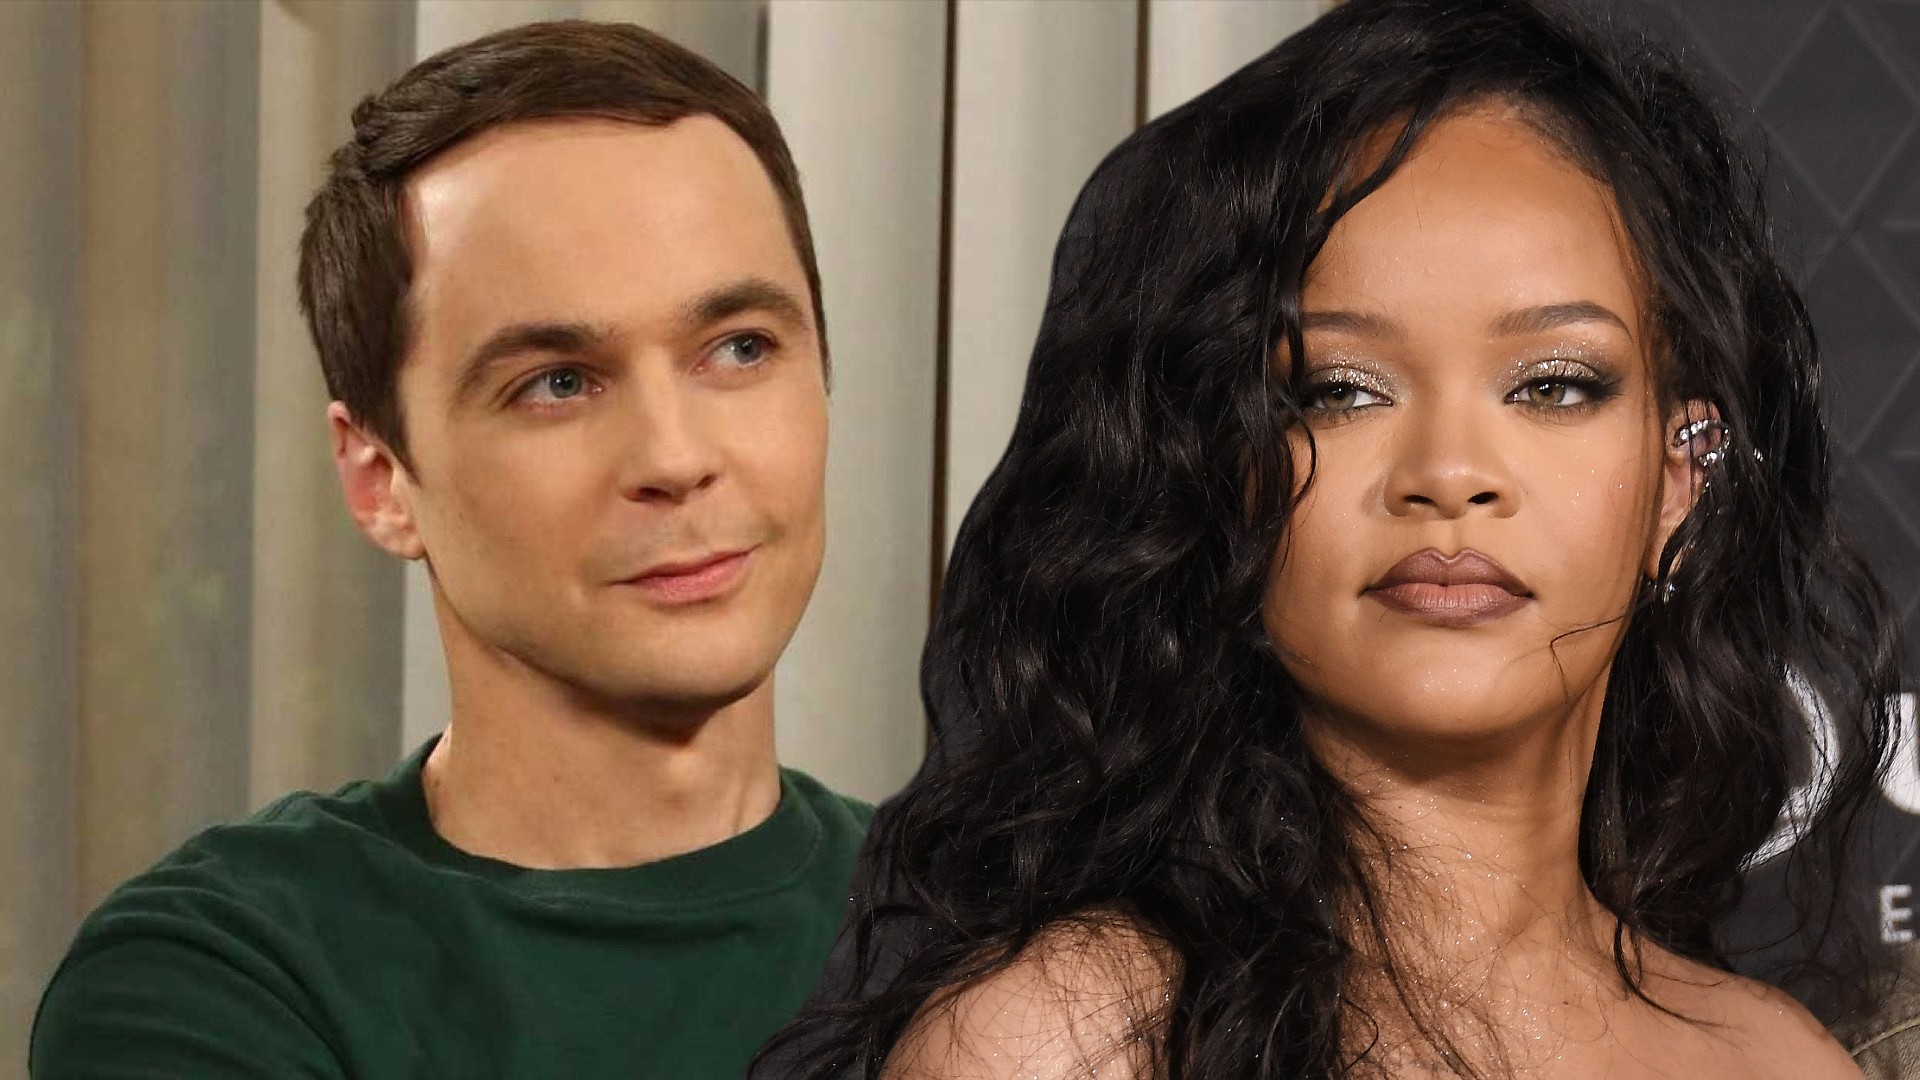 Jim Parsons' Awkward Moment with Rihanna Shocks Fans and Sparks Laughs: A Real-Life Sheldon Incident